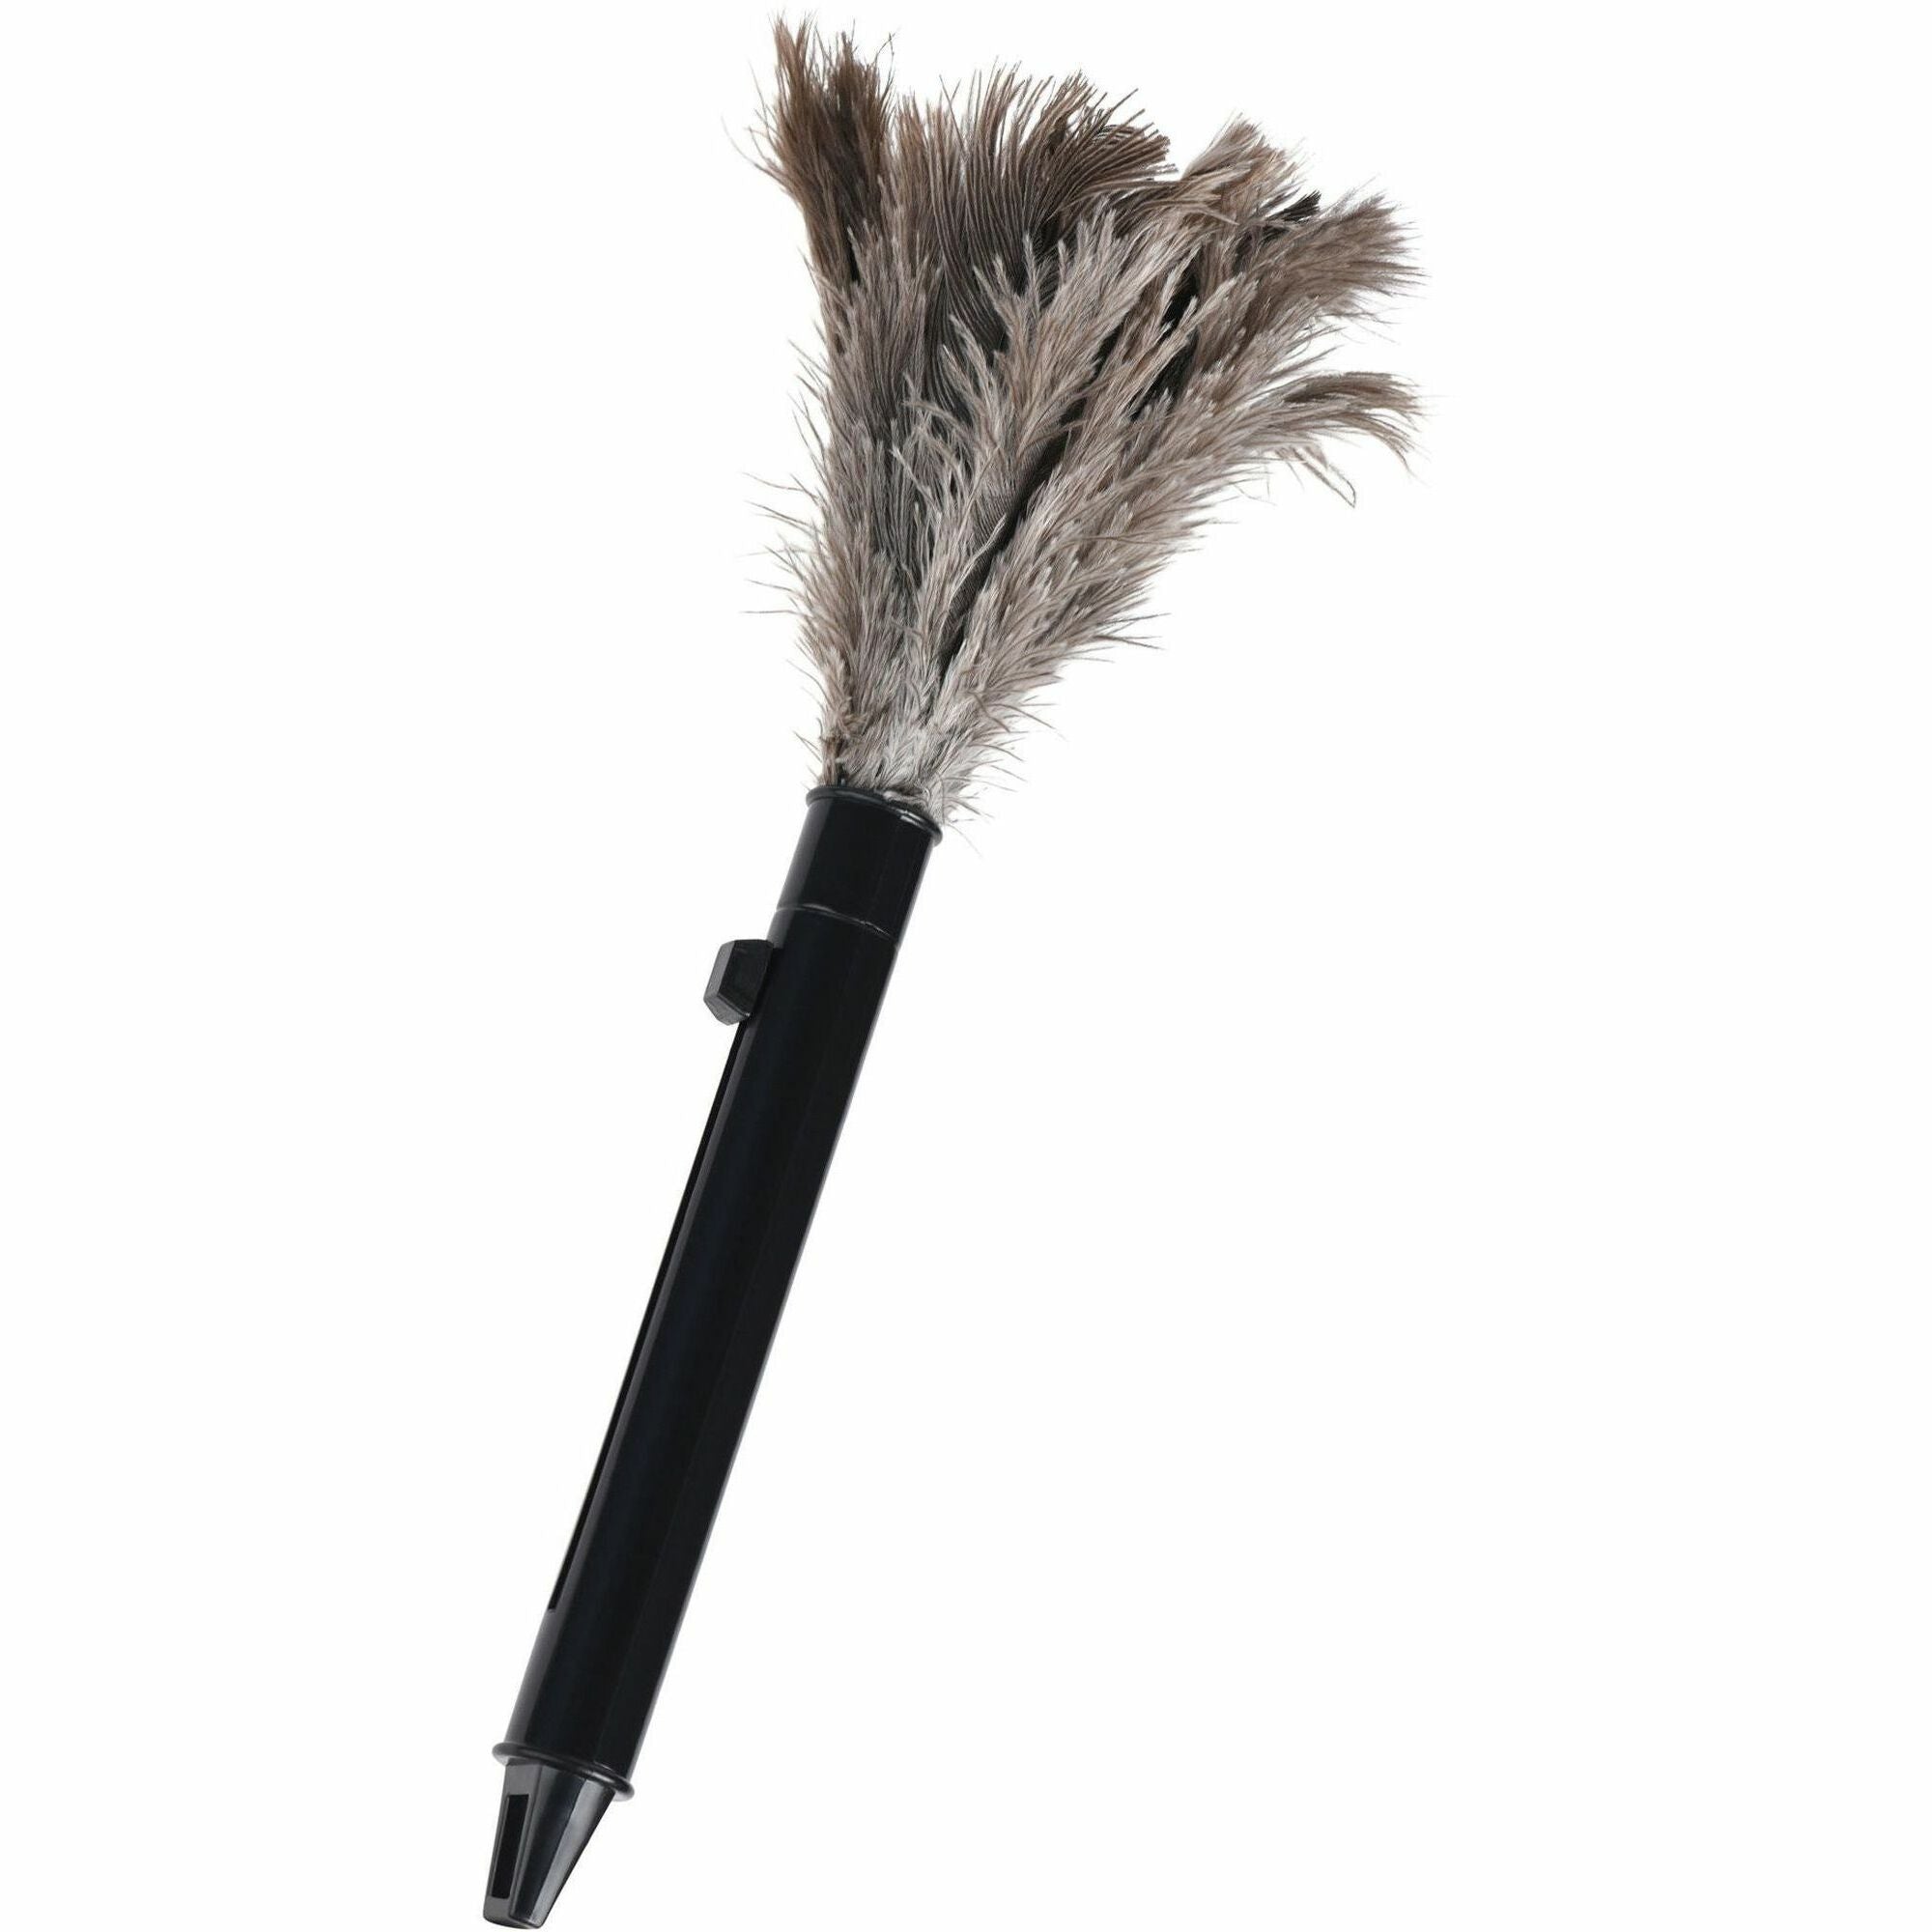 tatco-retractable-feather-duster-1-each-brown_tco41200 - 1